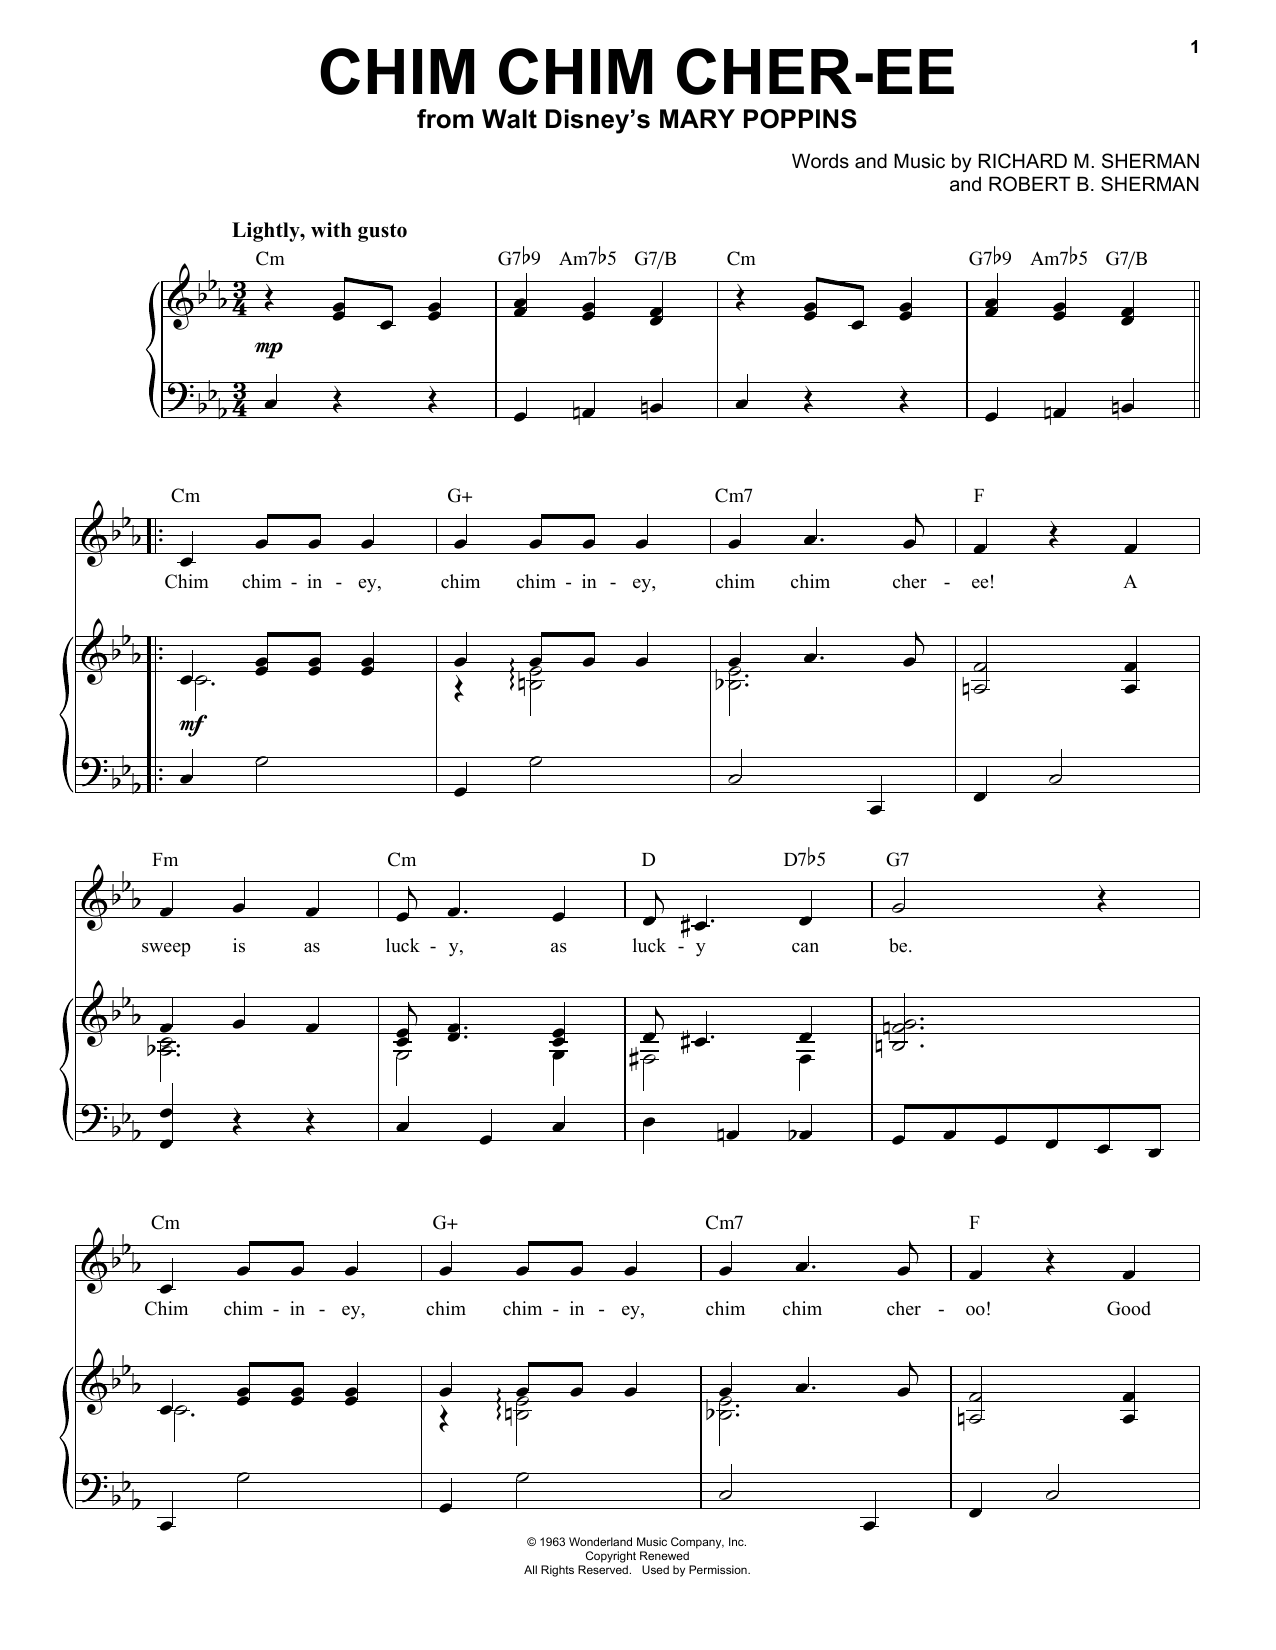 Sherman Brothers Chim Chim Cher-ee sheet music notes and chords. Download Printable PDF.